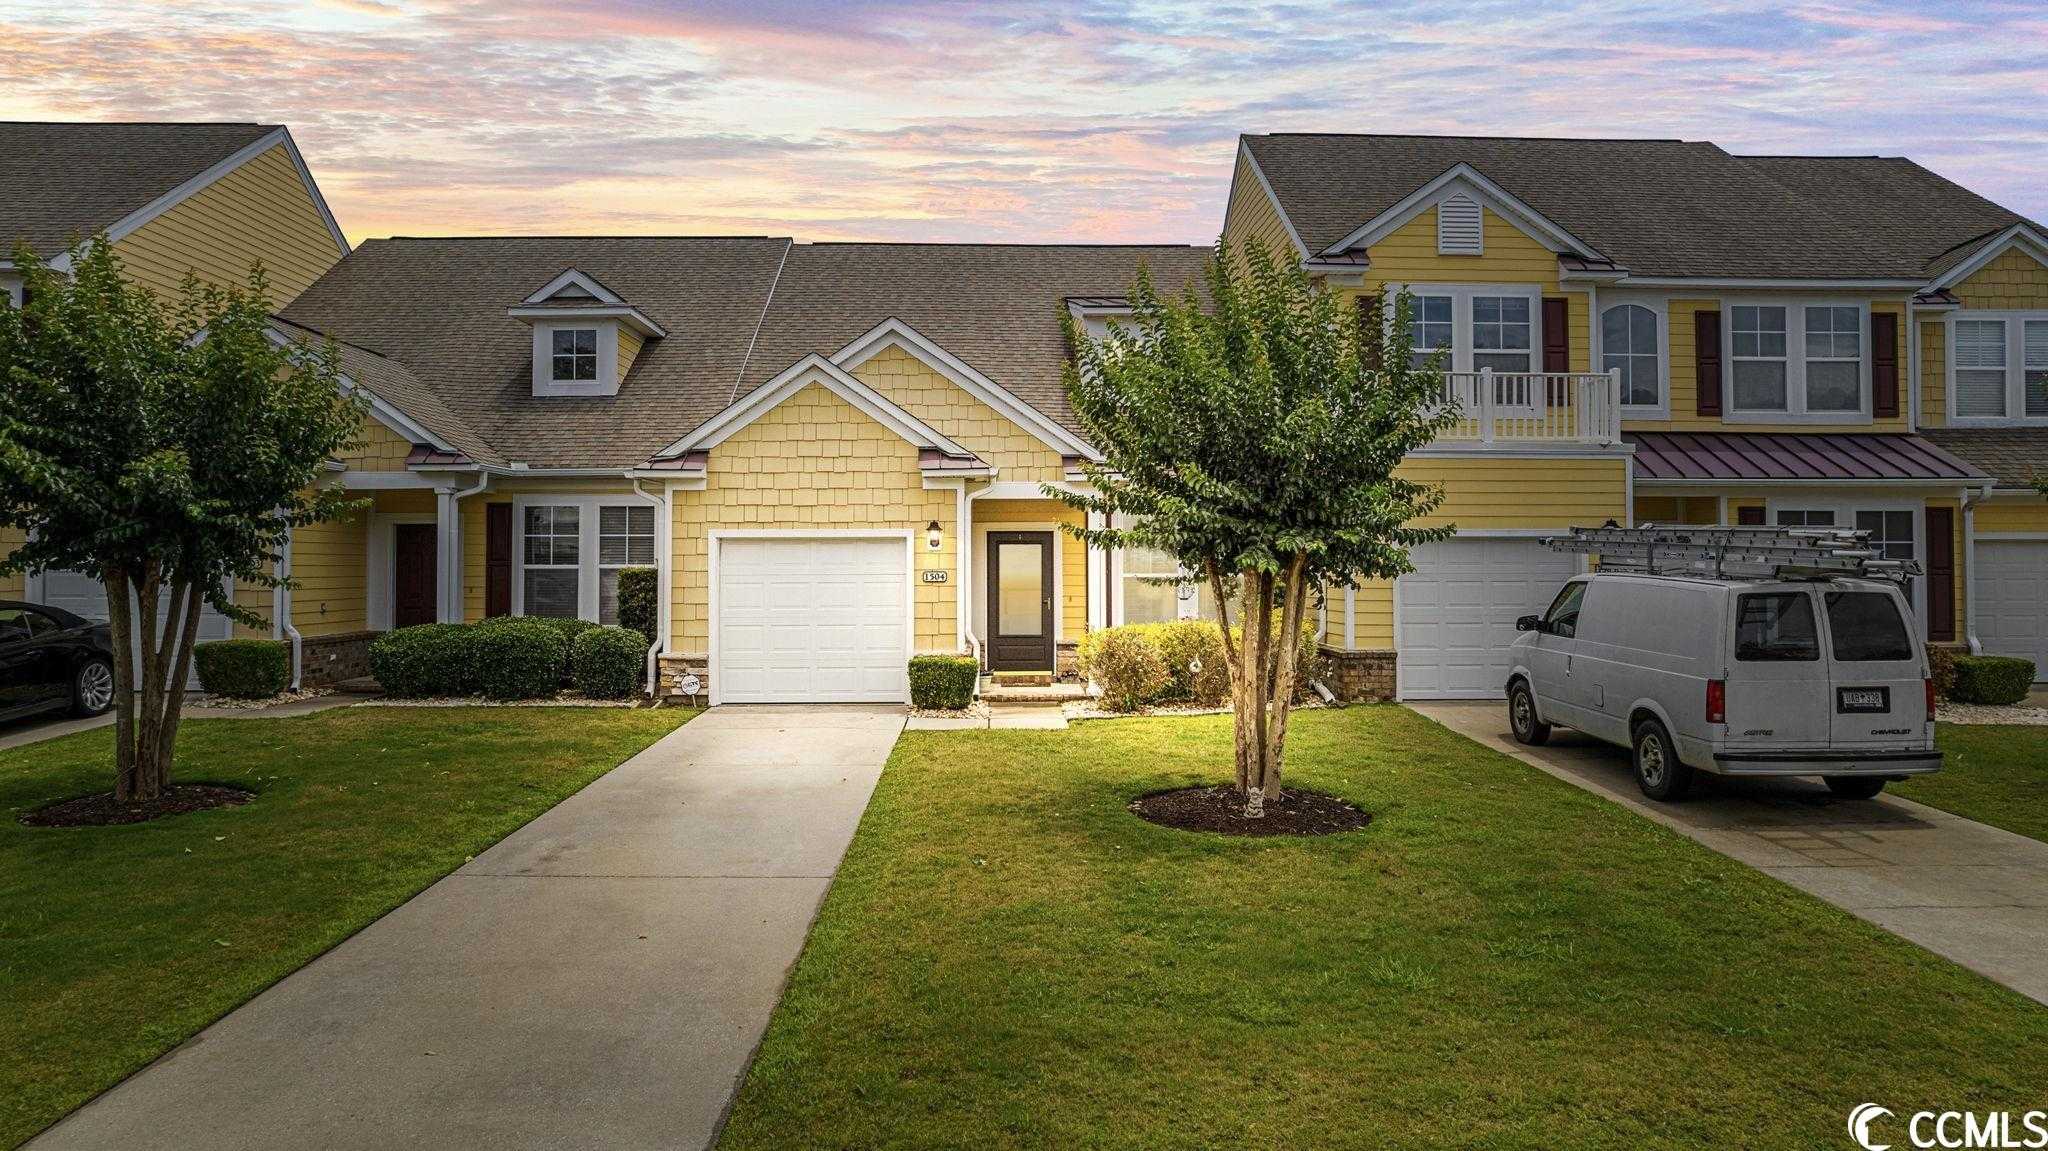 View Murrells Inlet, SC 29576 townhome